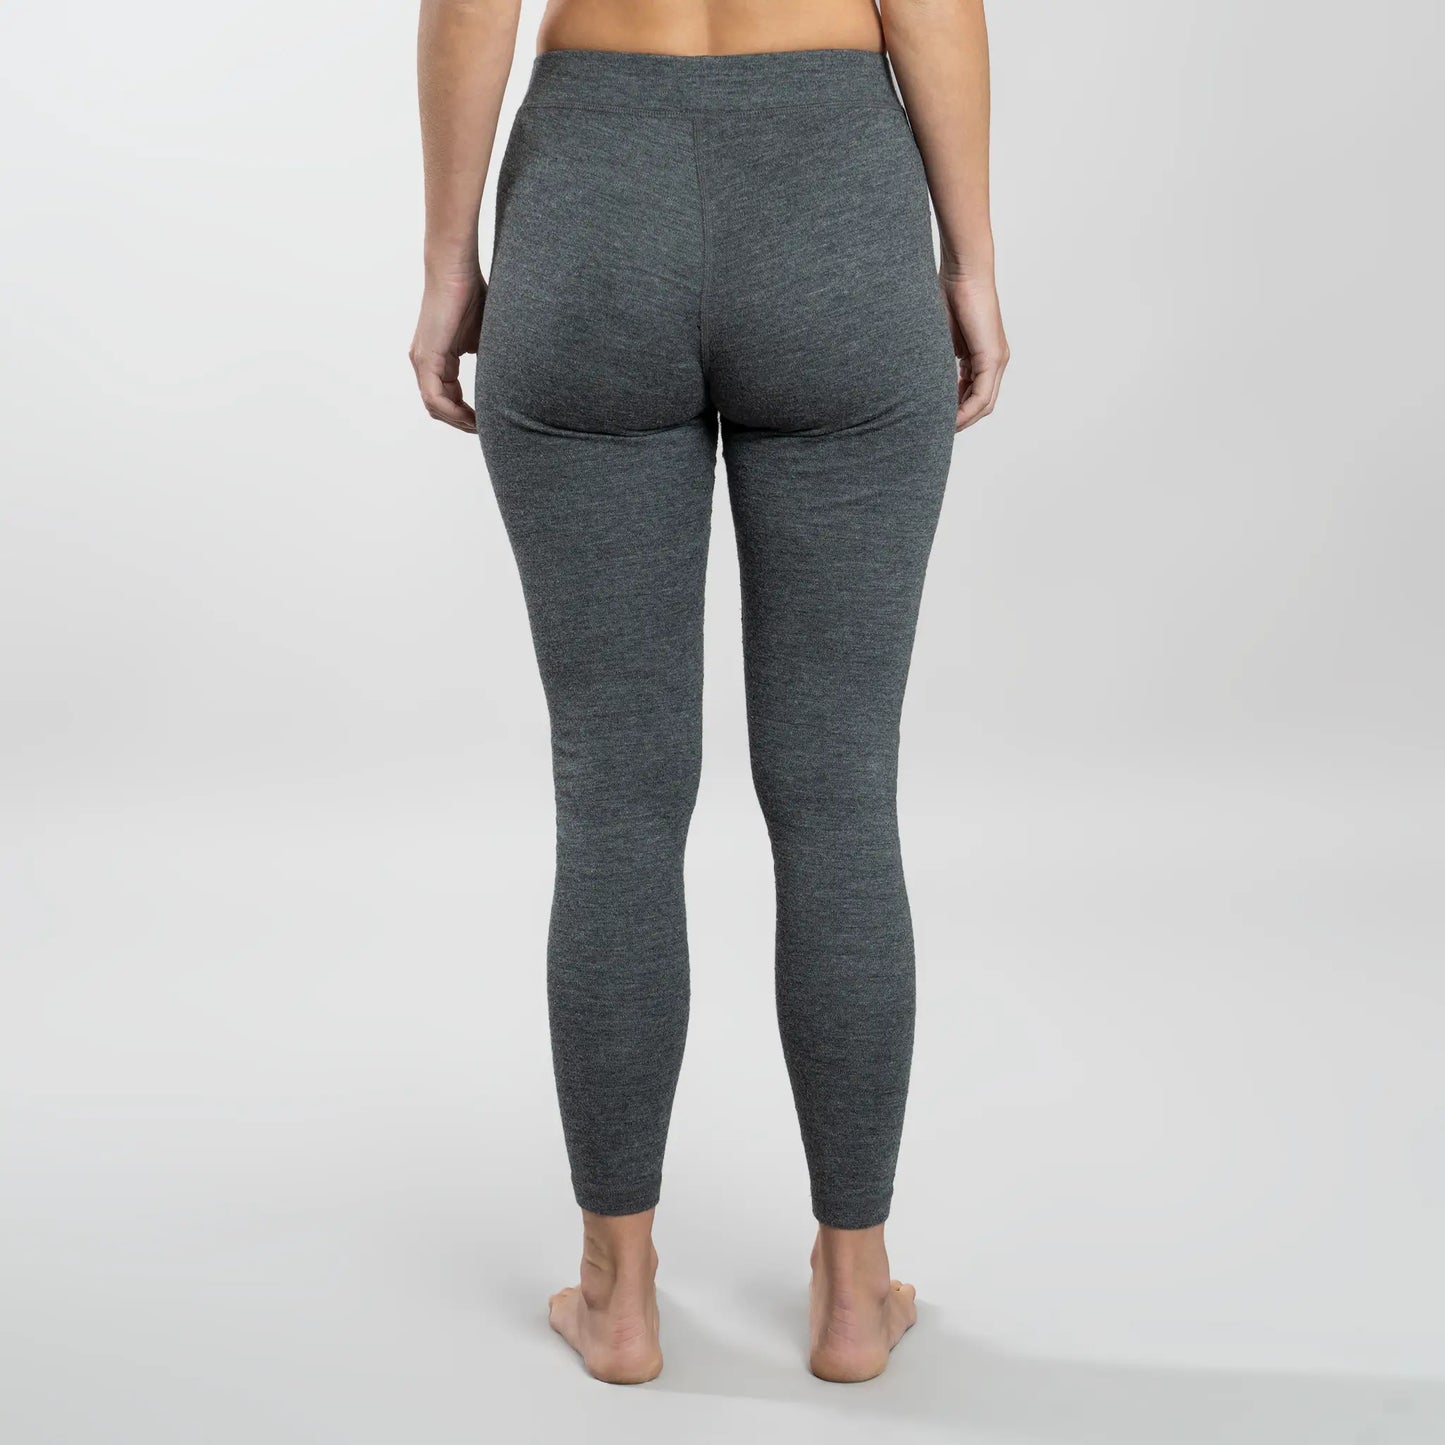 Unisex leggings with quality and warm wool Angora.